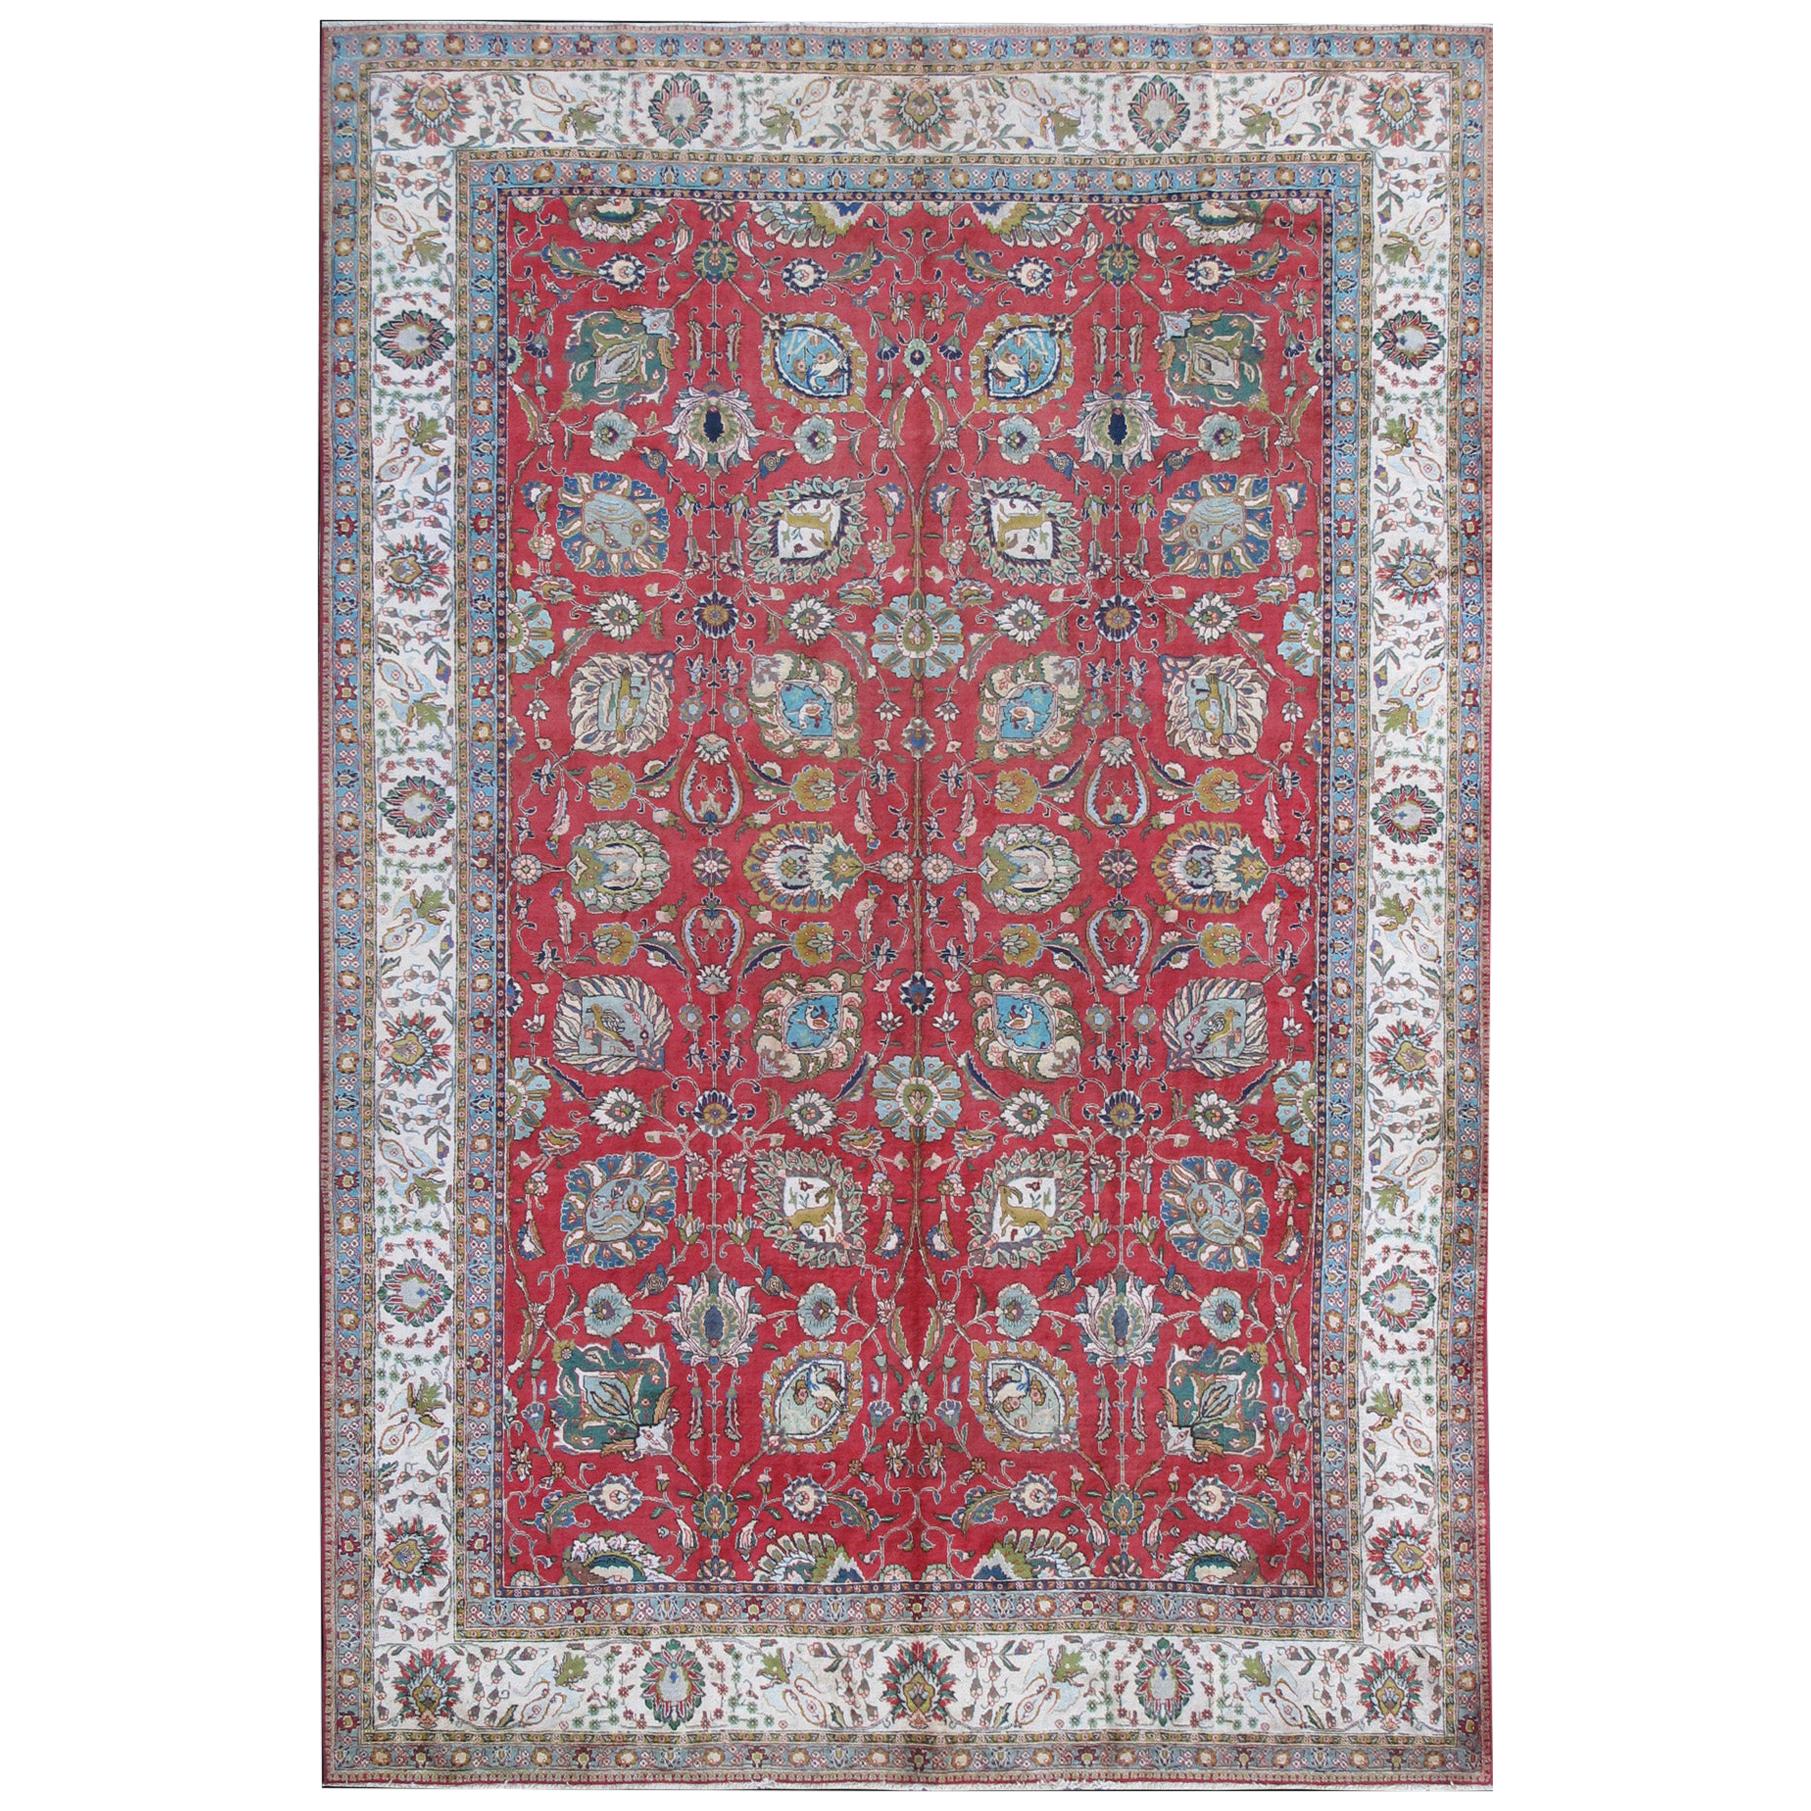 Large Vintage Persian Tabriz Rug with All-Over Design in Reds and Ivory